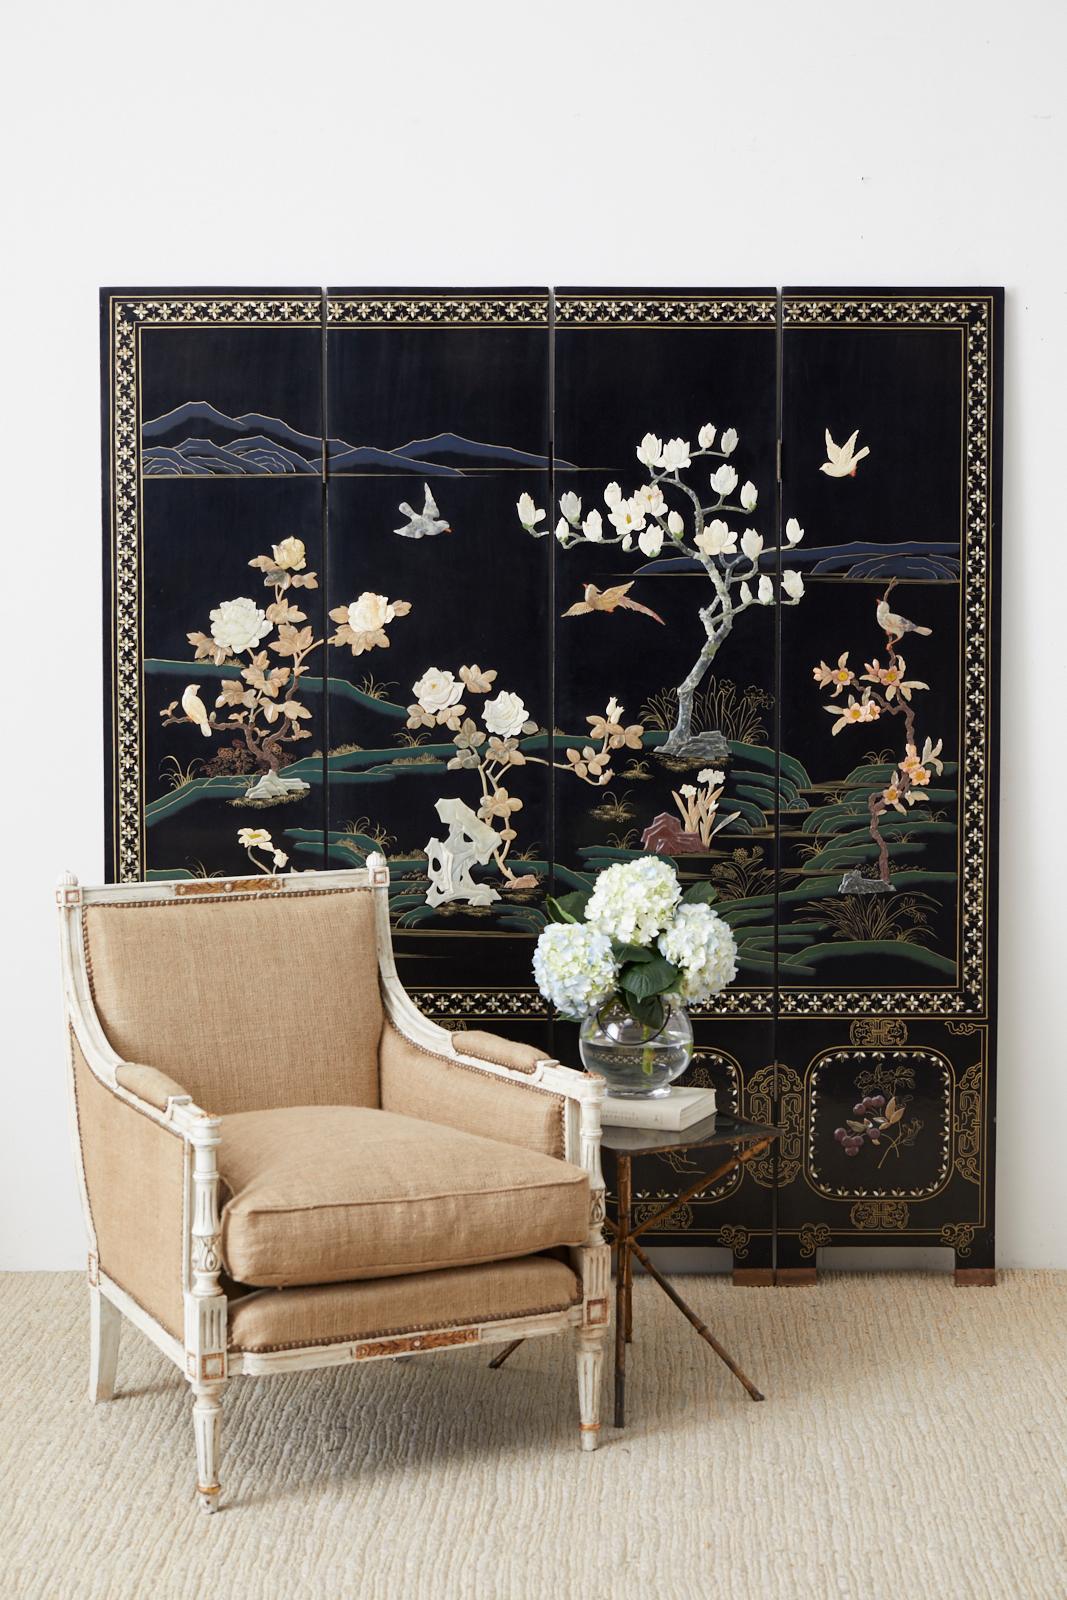 Stunning Chinese export four-panel screen depicting a colorful landscape embellished with hand carved flora and fauna in soapstone. The screen has vibrant green and blue color pigments over a black lacquer background. The border of the screen panels